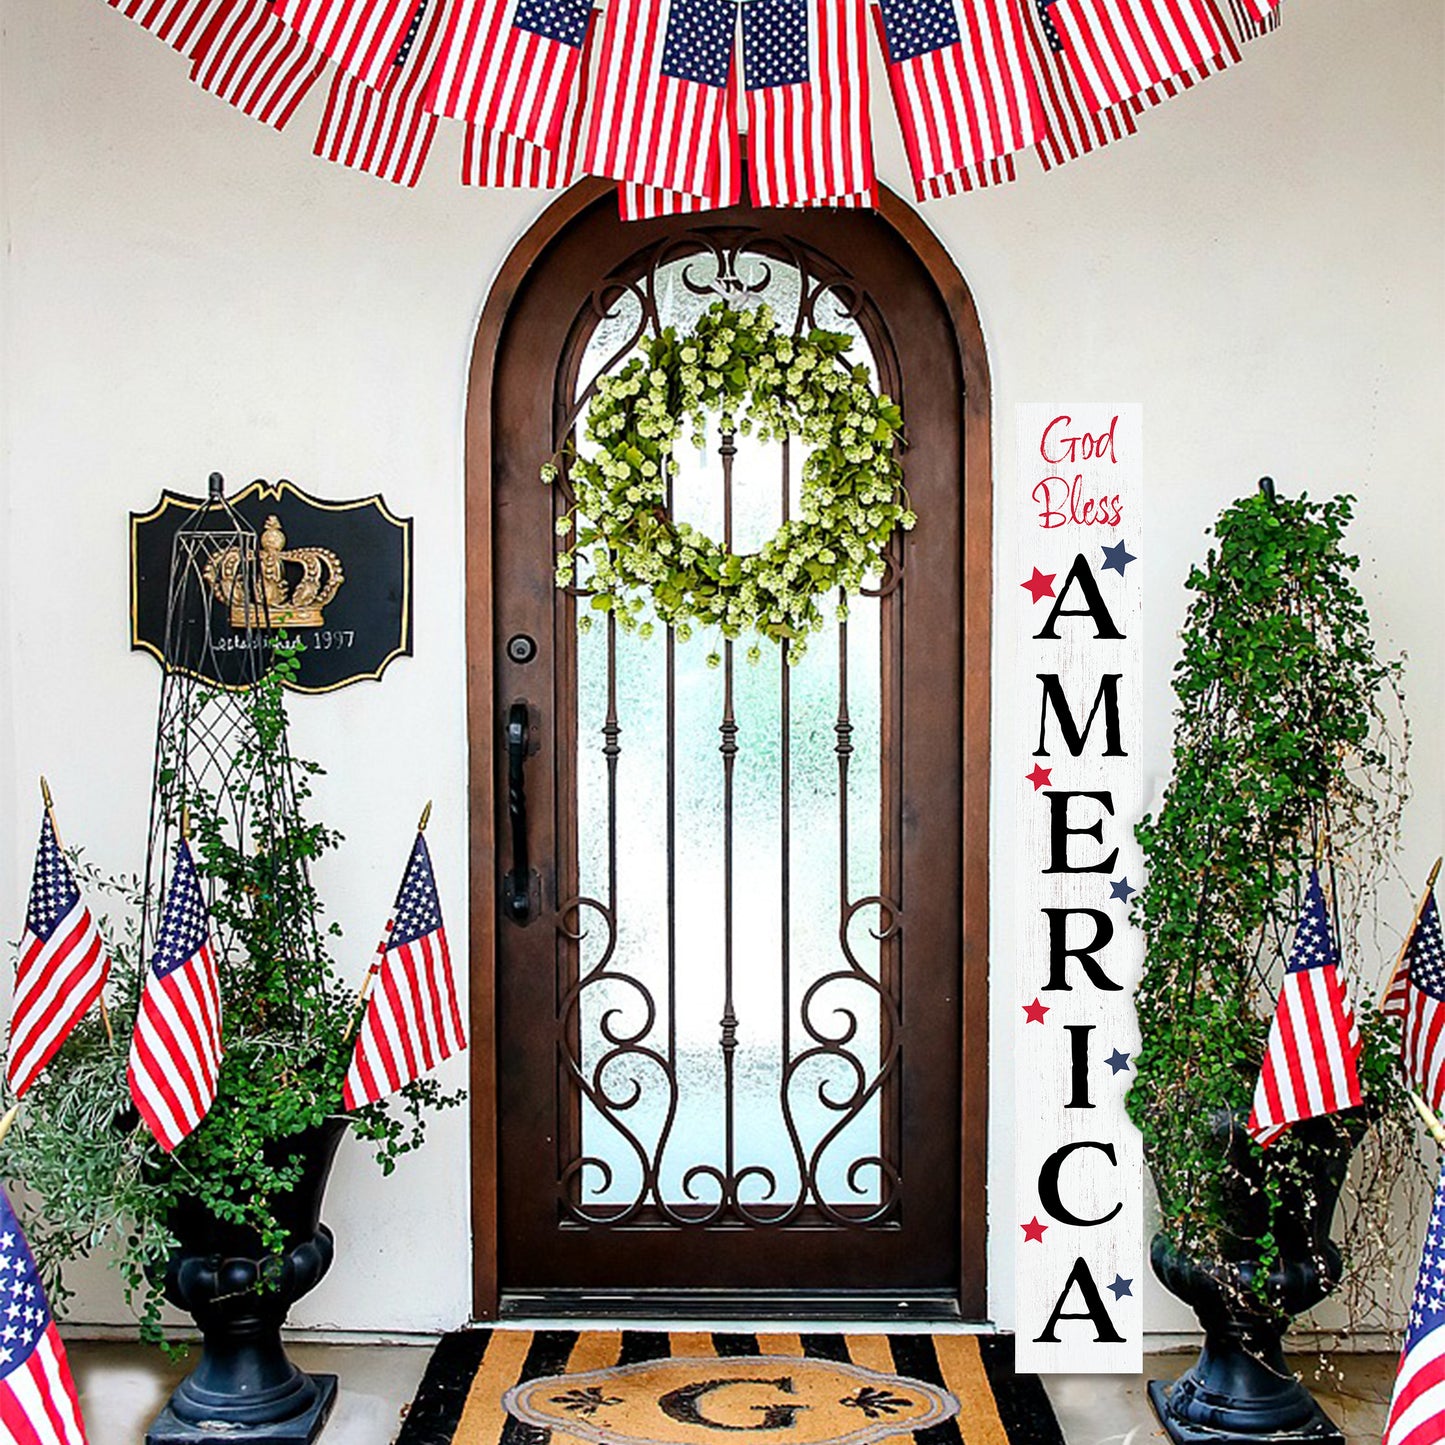 72in 4th of July God Bless America Porch Sign | Patriotic Wooden Porch Decor | Farmhouse Decor for Porch | Independence Day Outdoor Decor